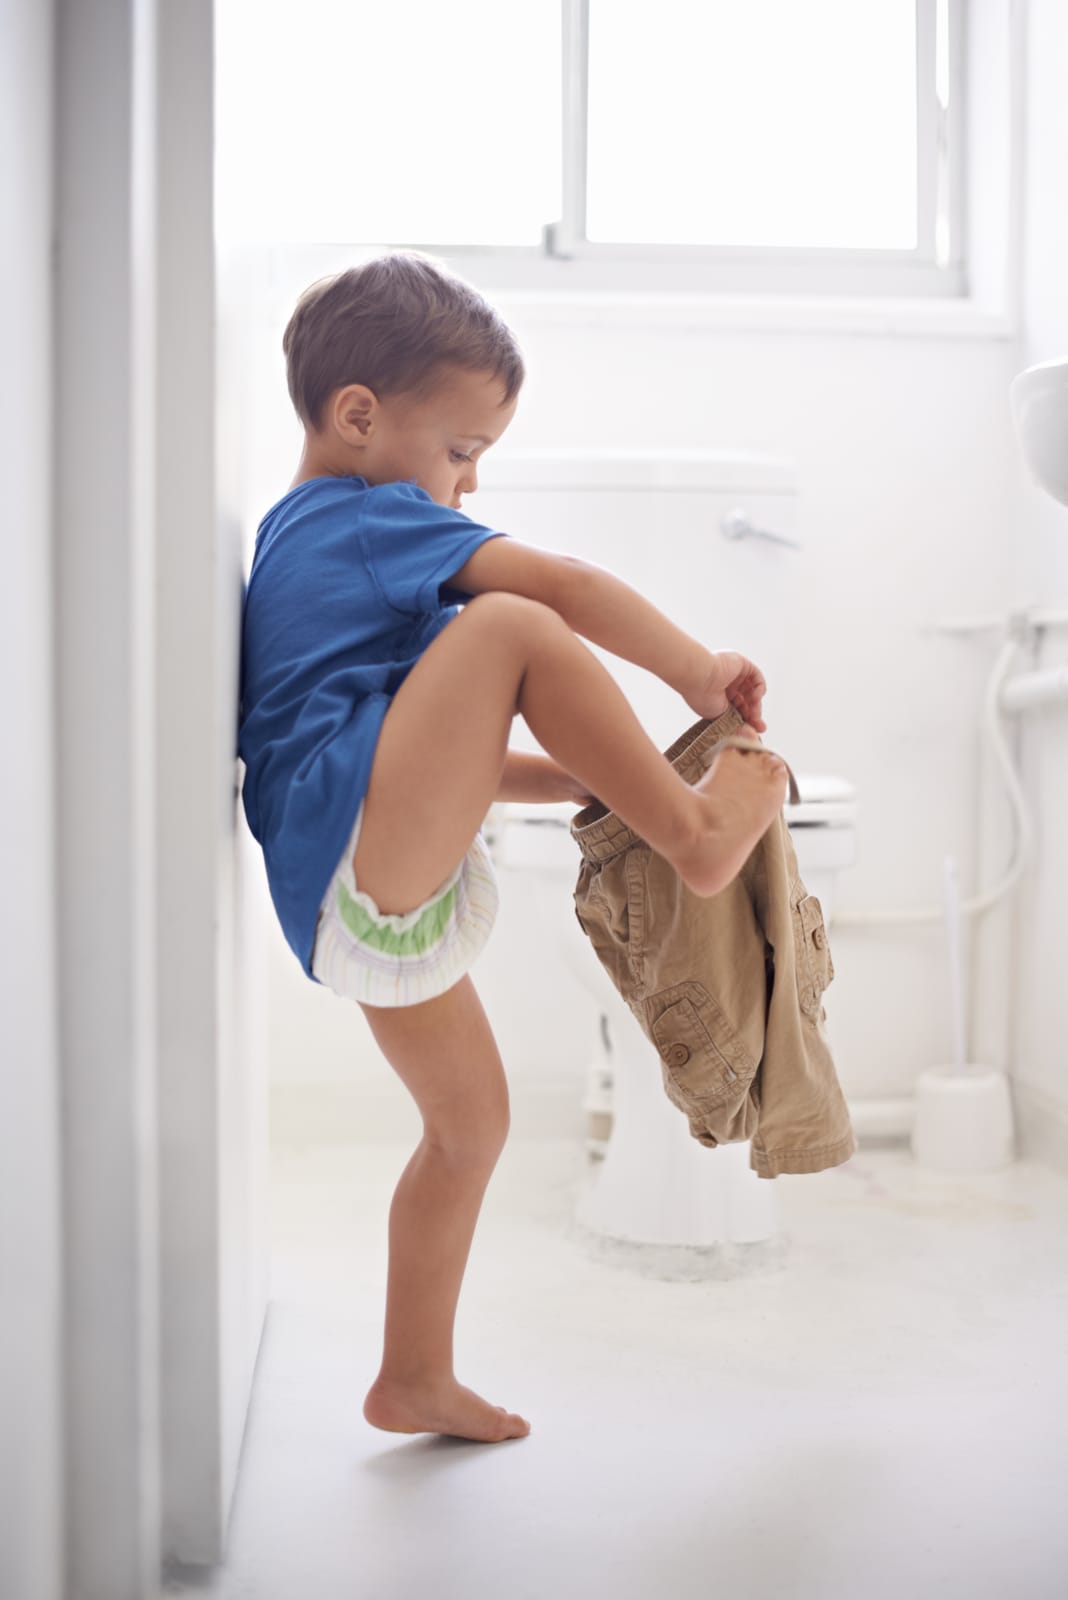 57182368_child-bathroom-and-toilet-training-for-learning-growth-milestone-or-hygiene-male-person-kid-diaper-and-pants-or-step-for-development-in-home-for-parent-care-for-toddler-teaching-health-or-love.jpg